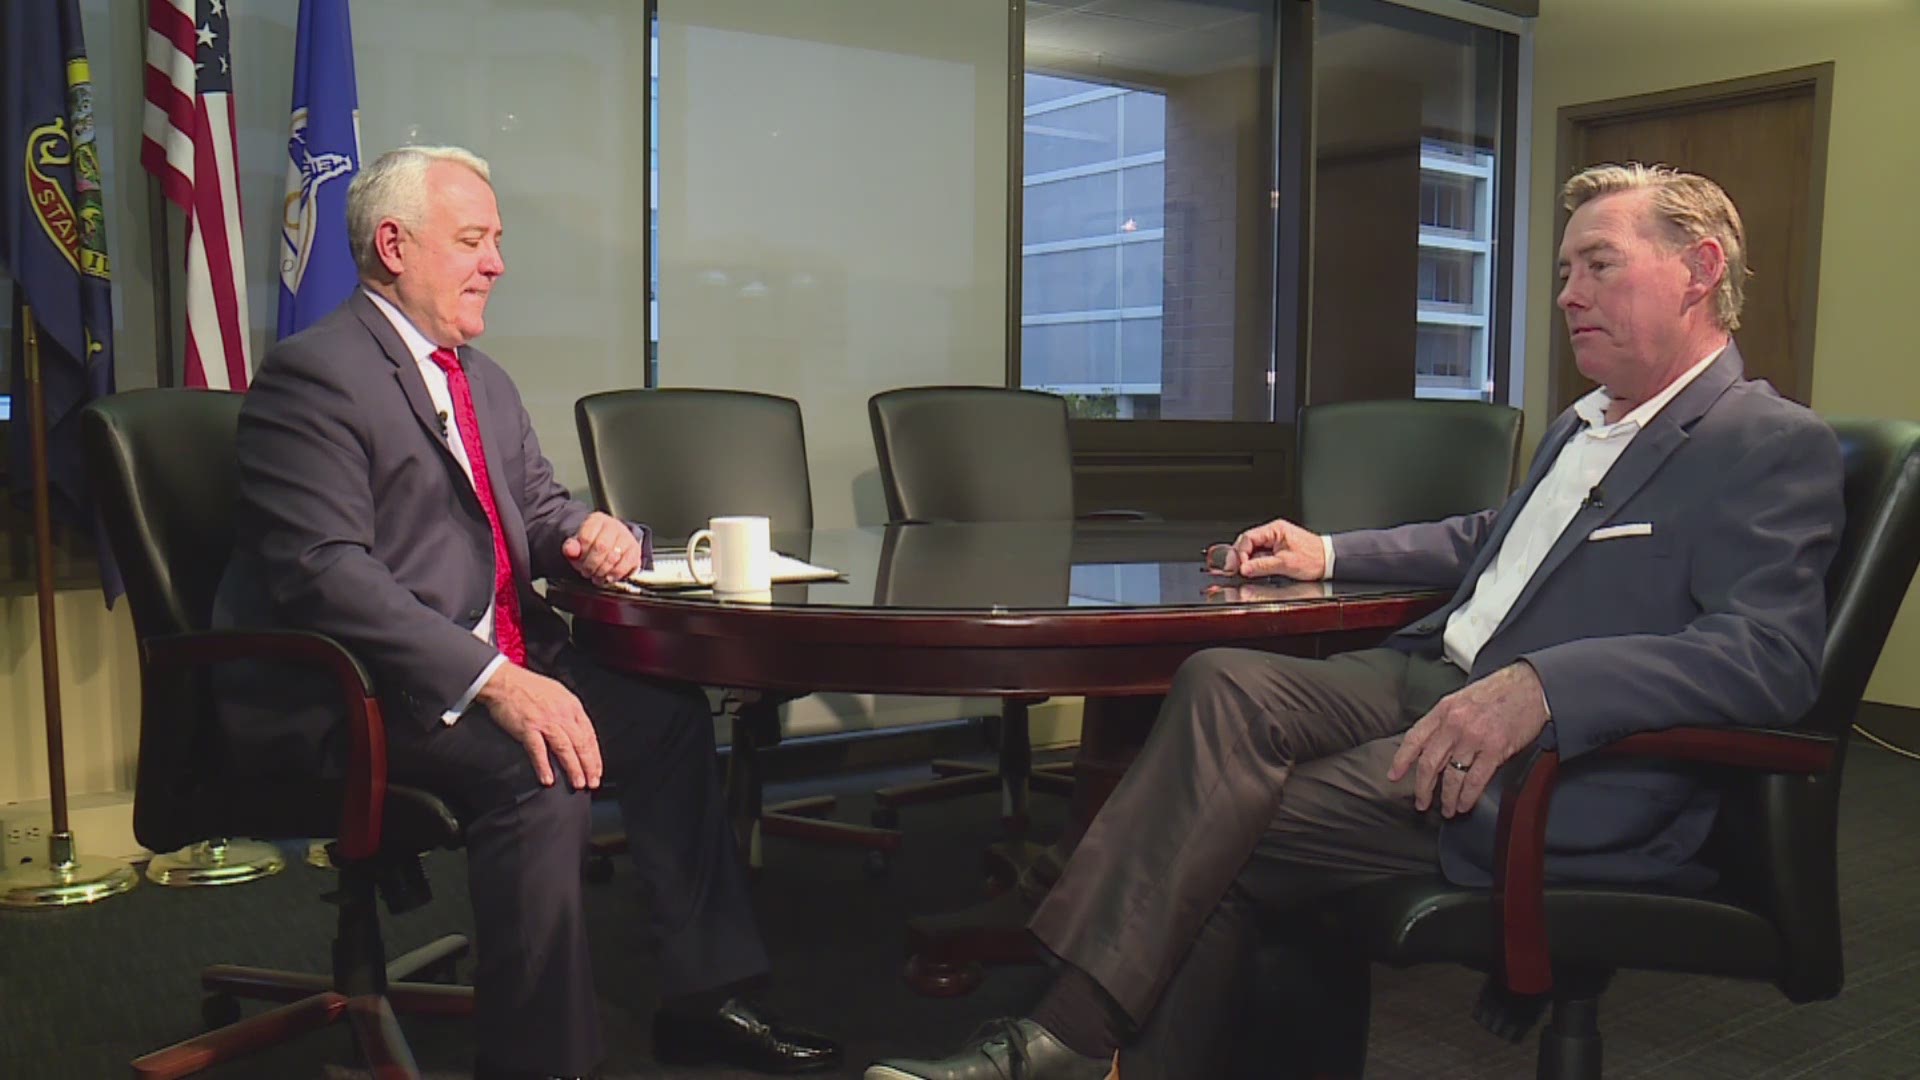 Bieter sat down with Mark Johnson to talk about the last 16 years as Boise's mayor and what lies ahead.